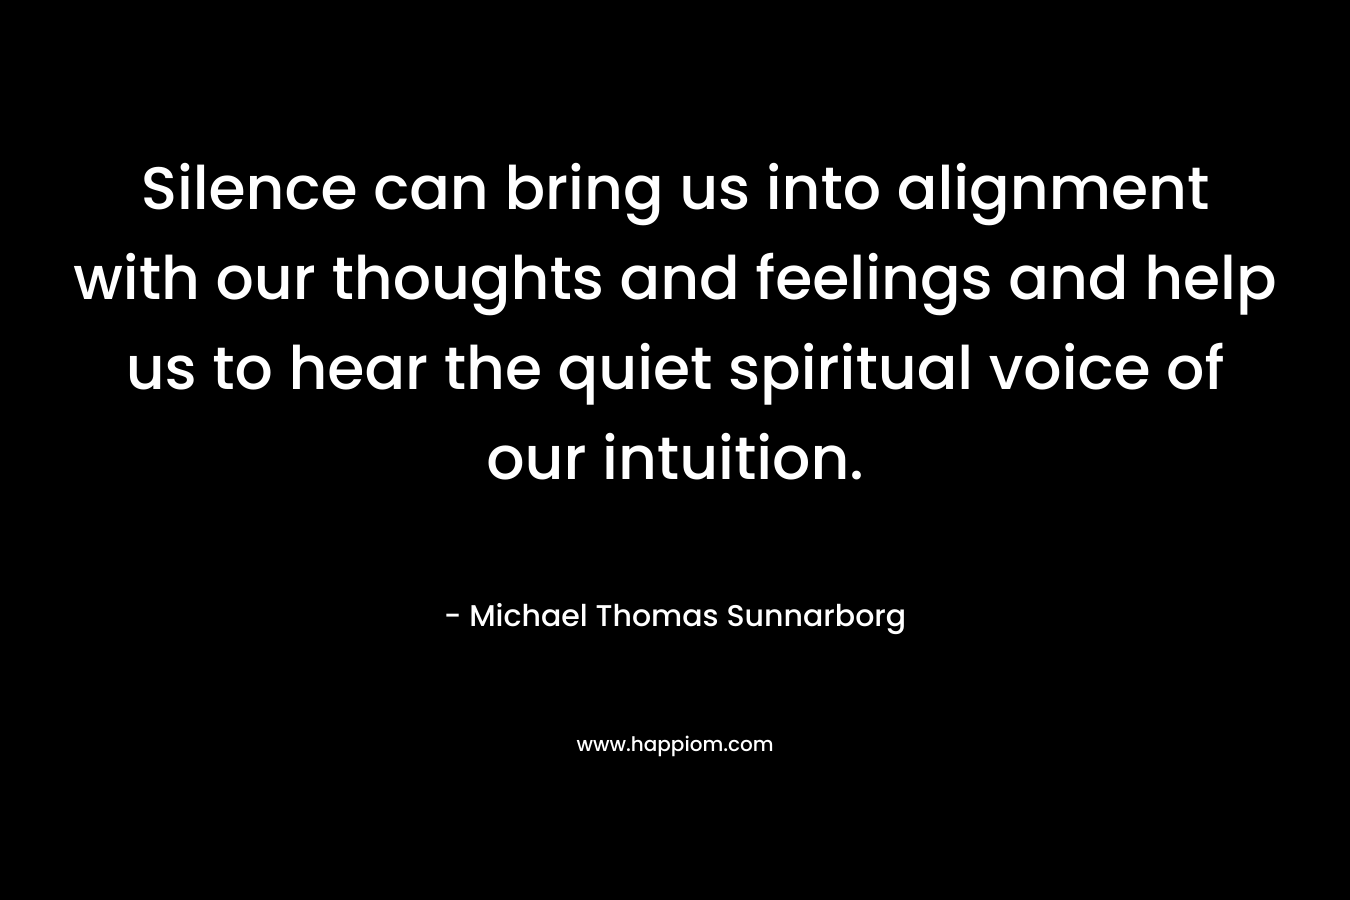 Silence can bring us into alignment with our thoughts and feelings and help us to hear the quiet spiritual voice of our intuition.